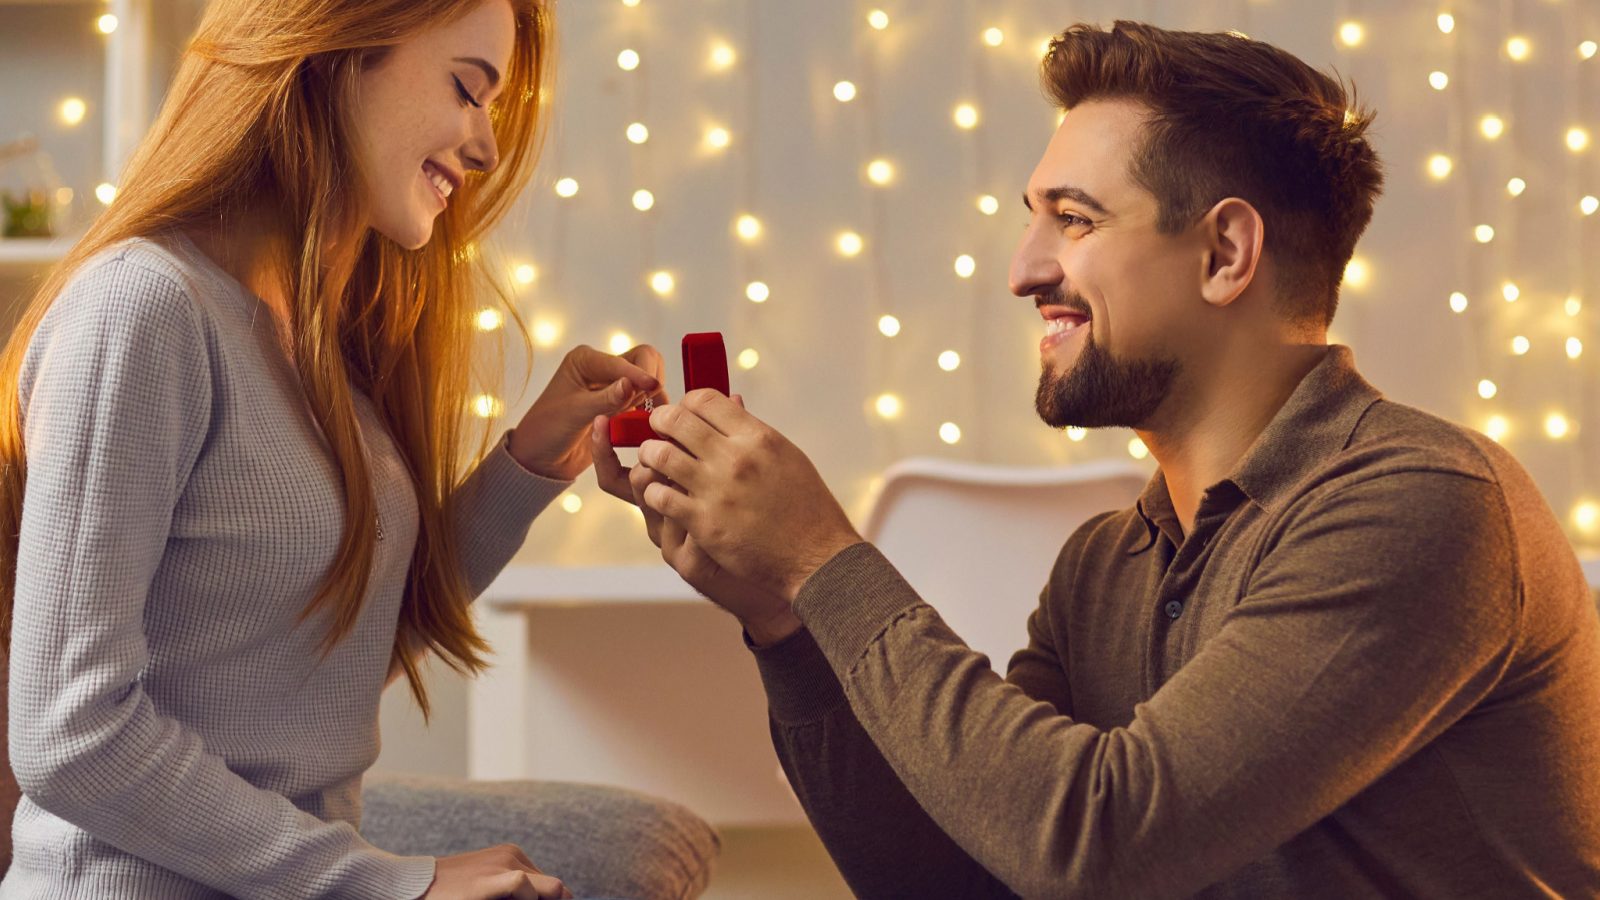 Happy Propose Day 2023: Best Wishes, Messages, Images and Quotes ...